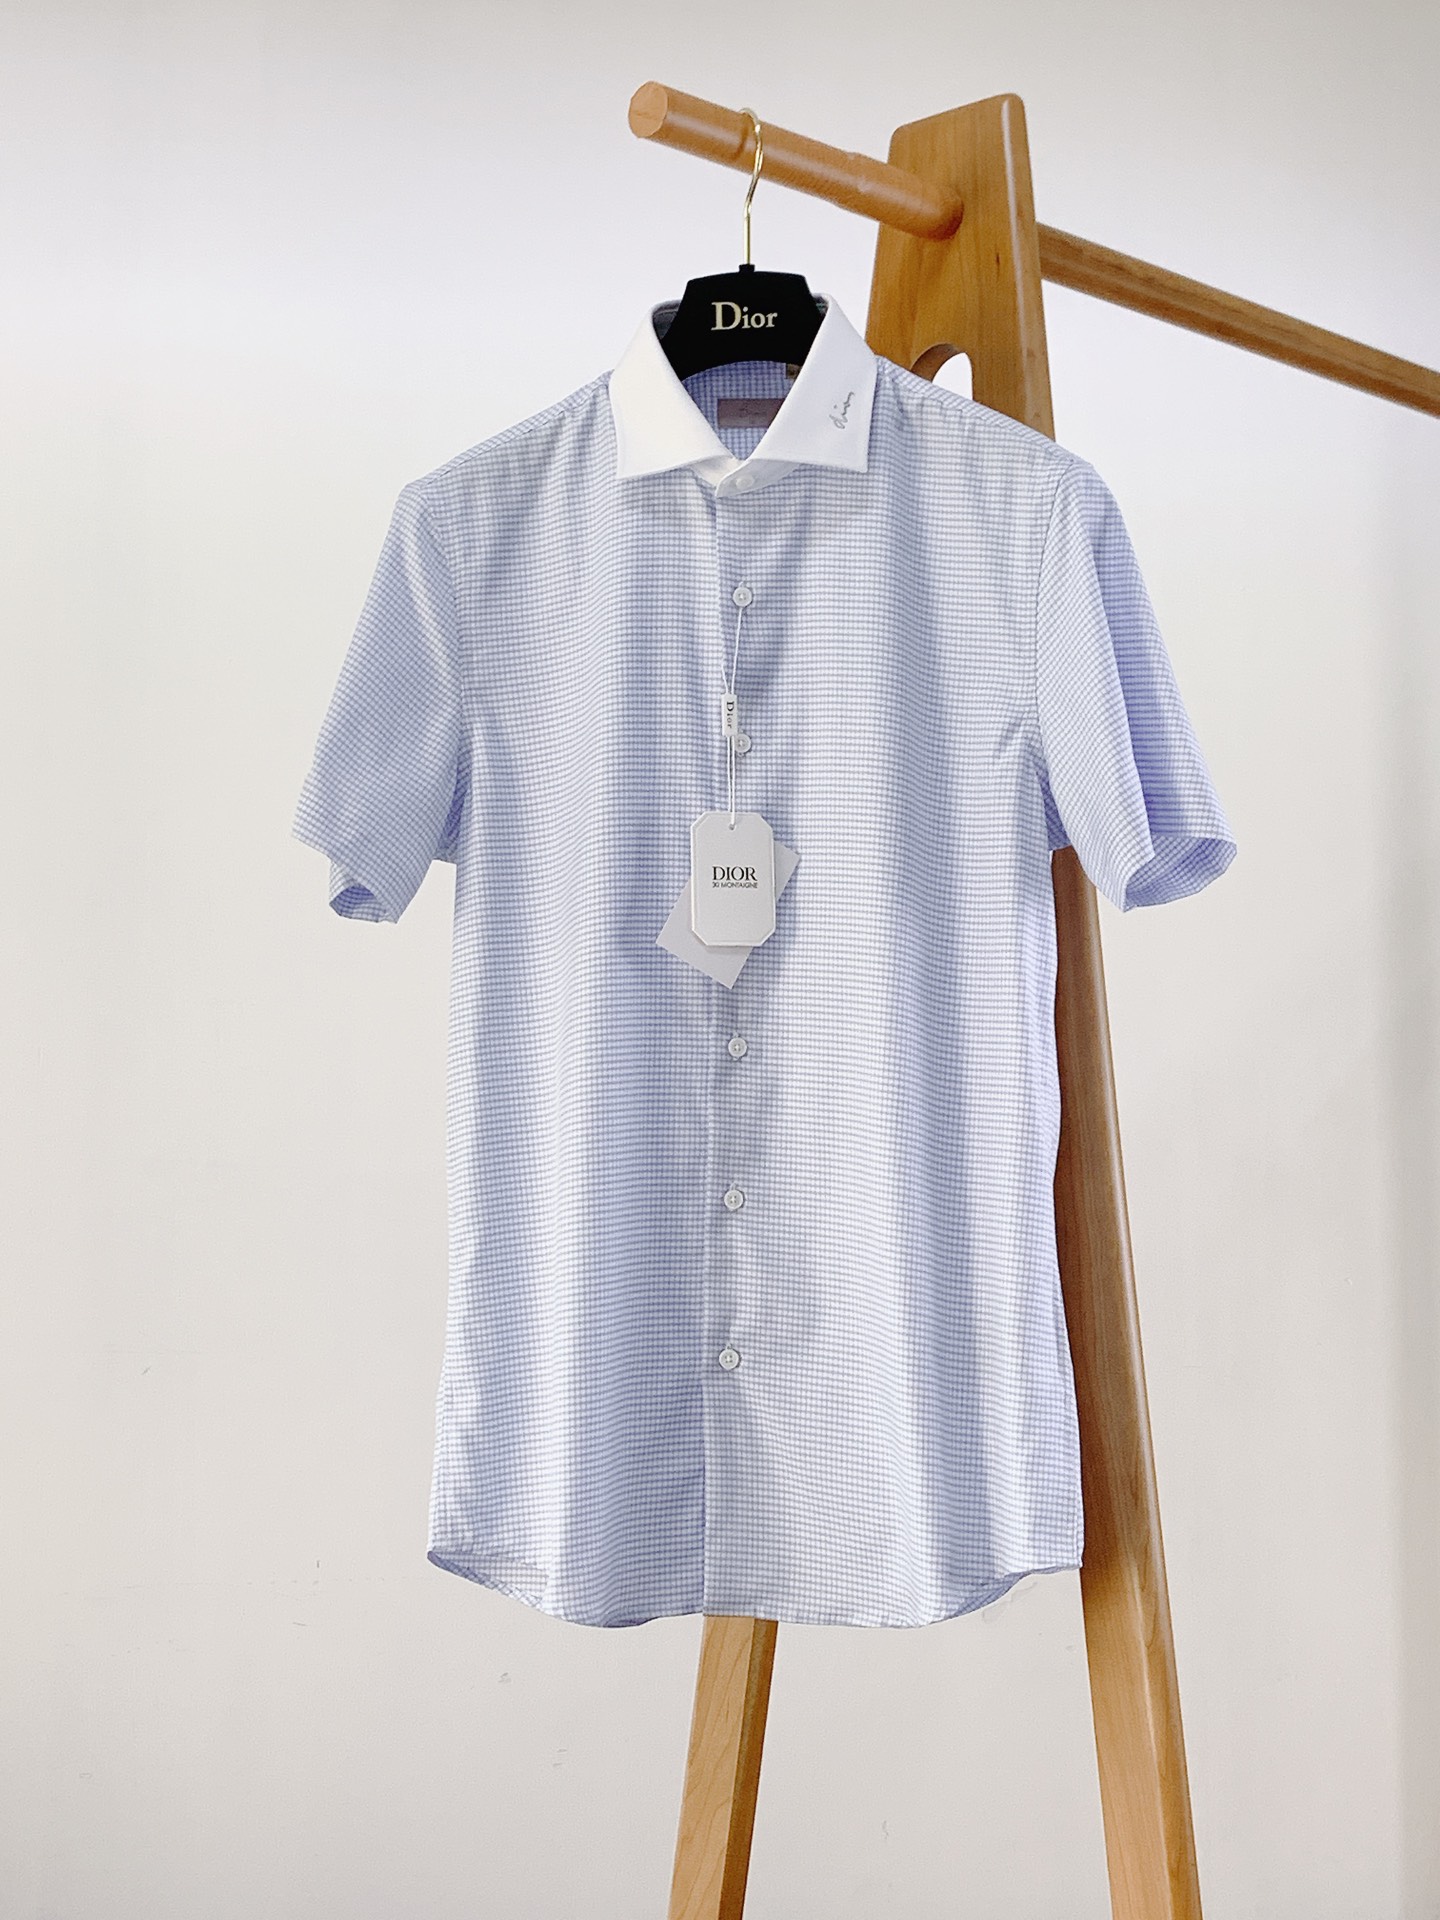 Dior Clothing Shirts & Blouses Spring/Summer Collection Casual